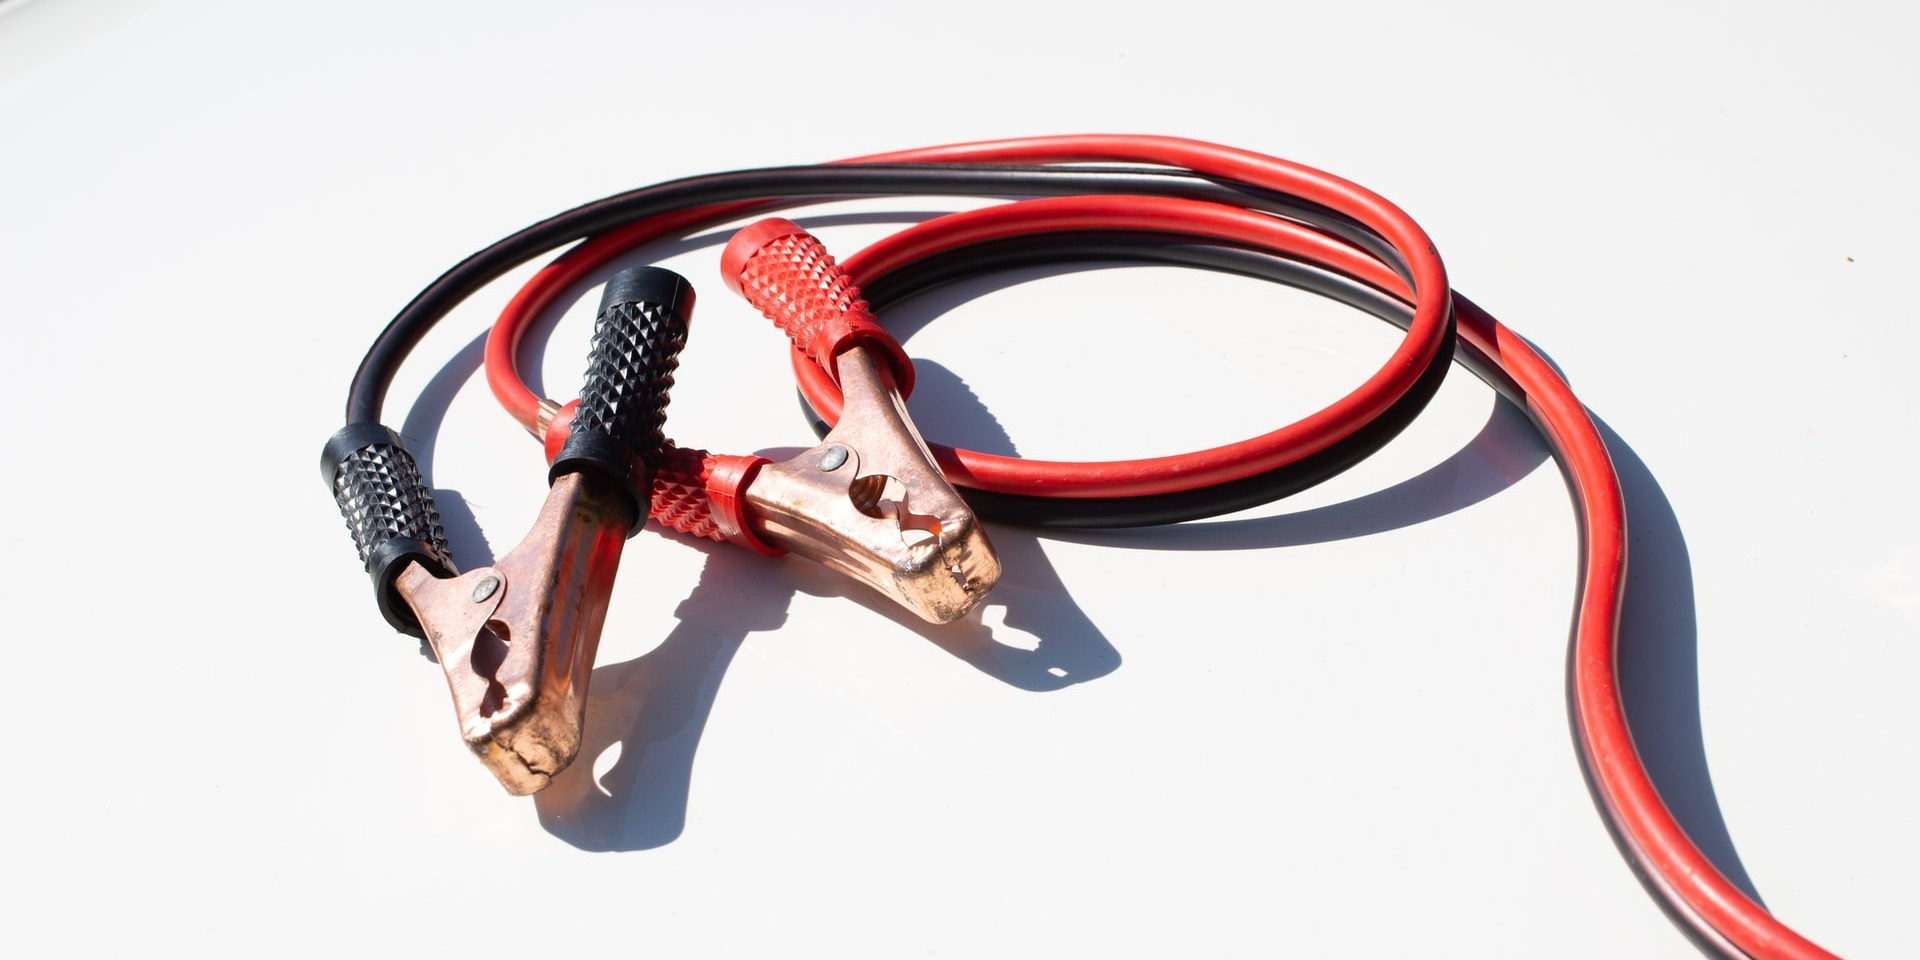 recharge a car battery without a jumper cable